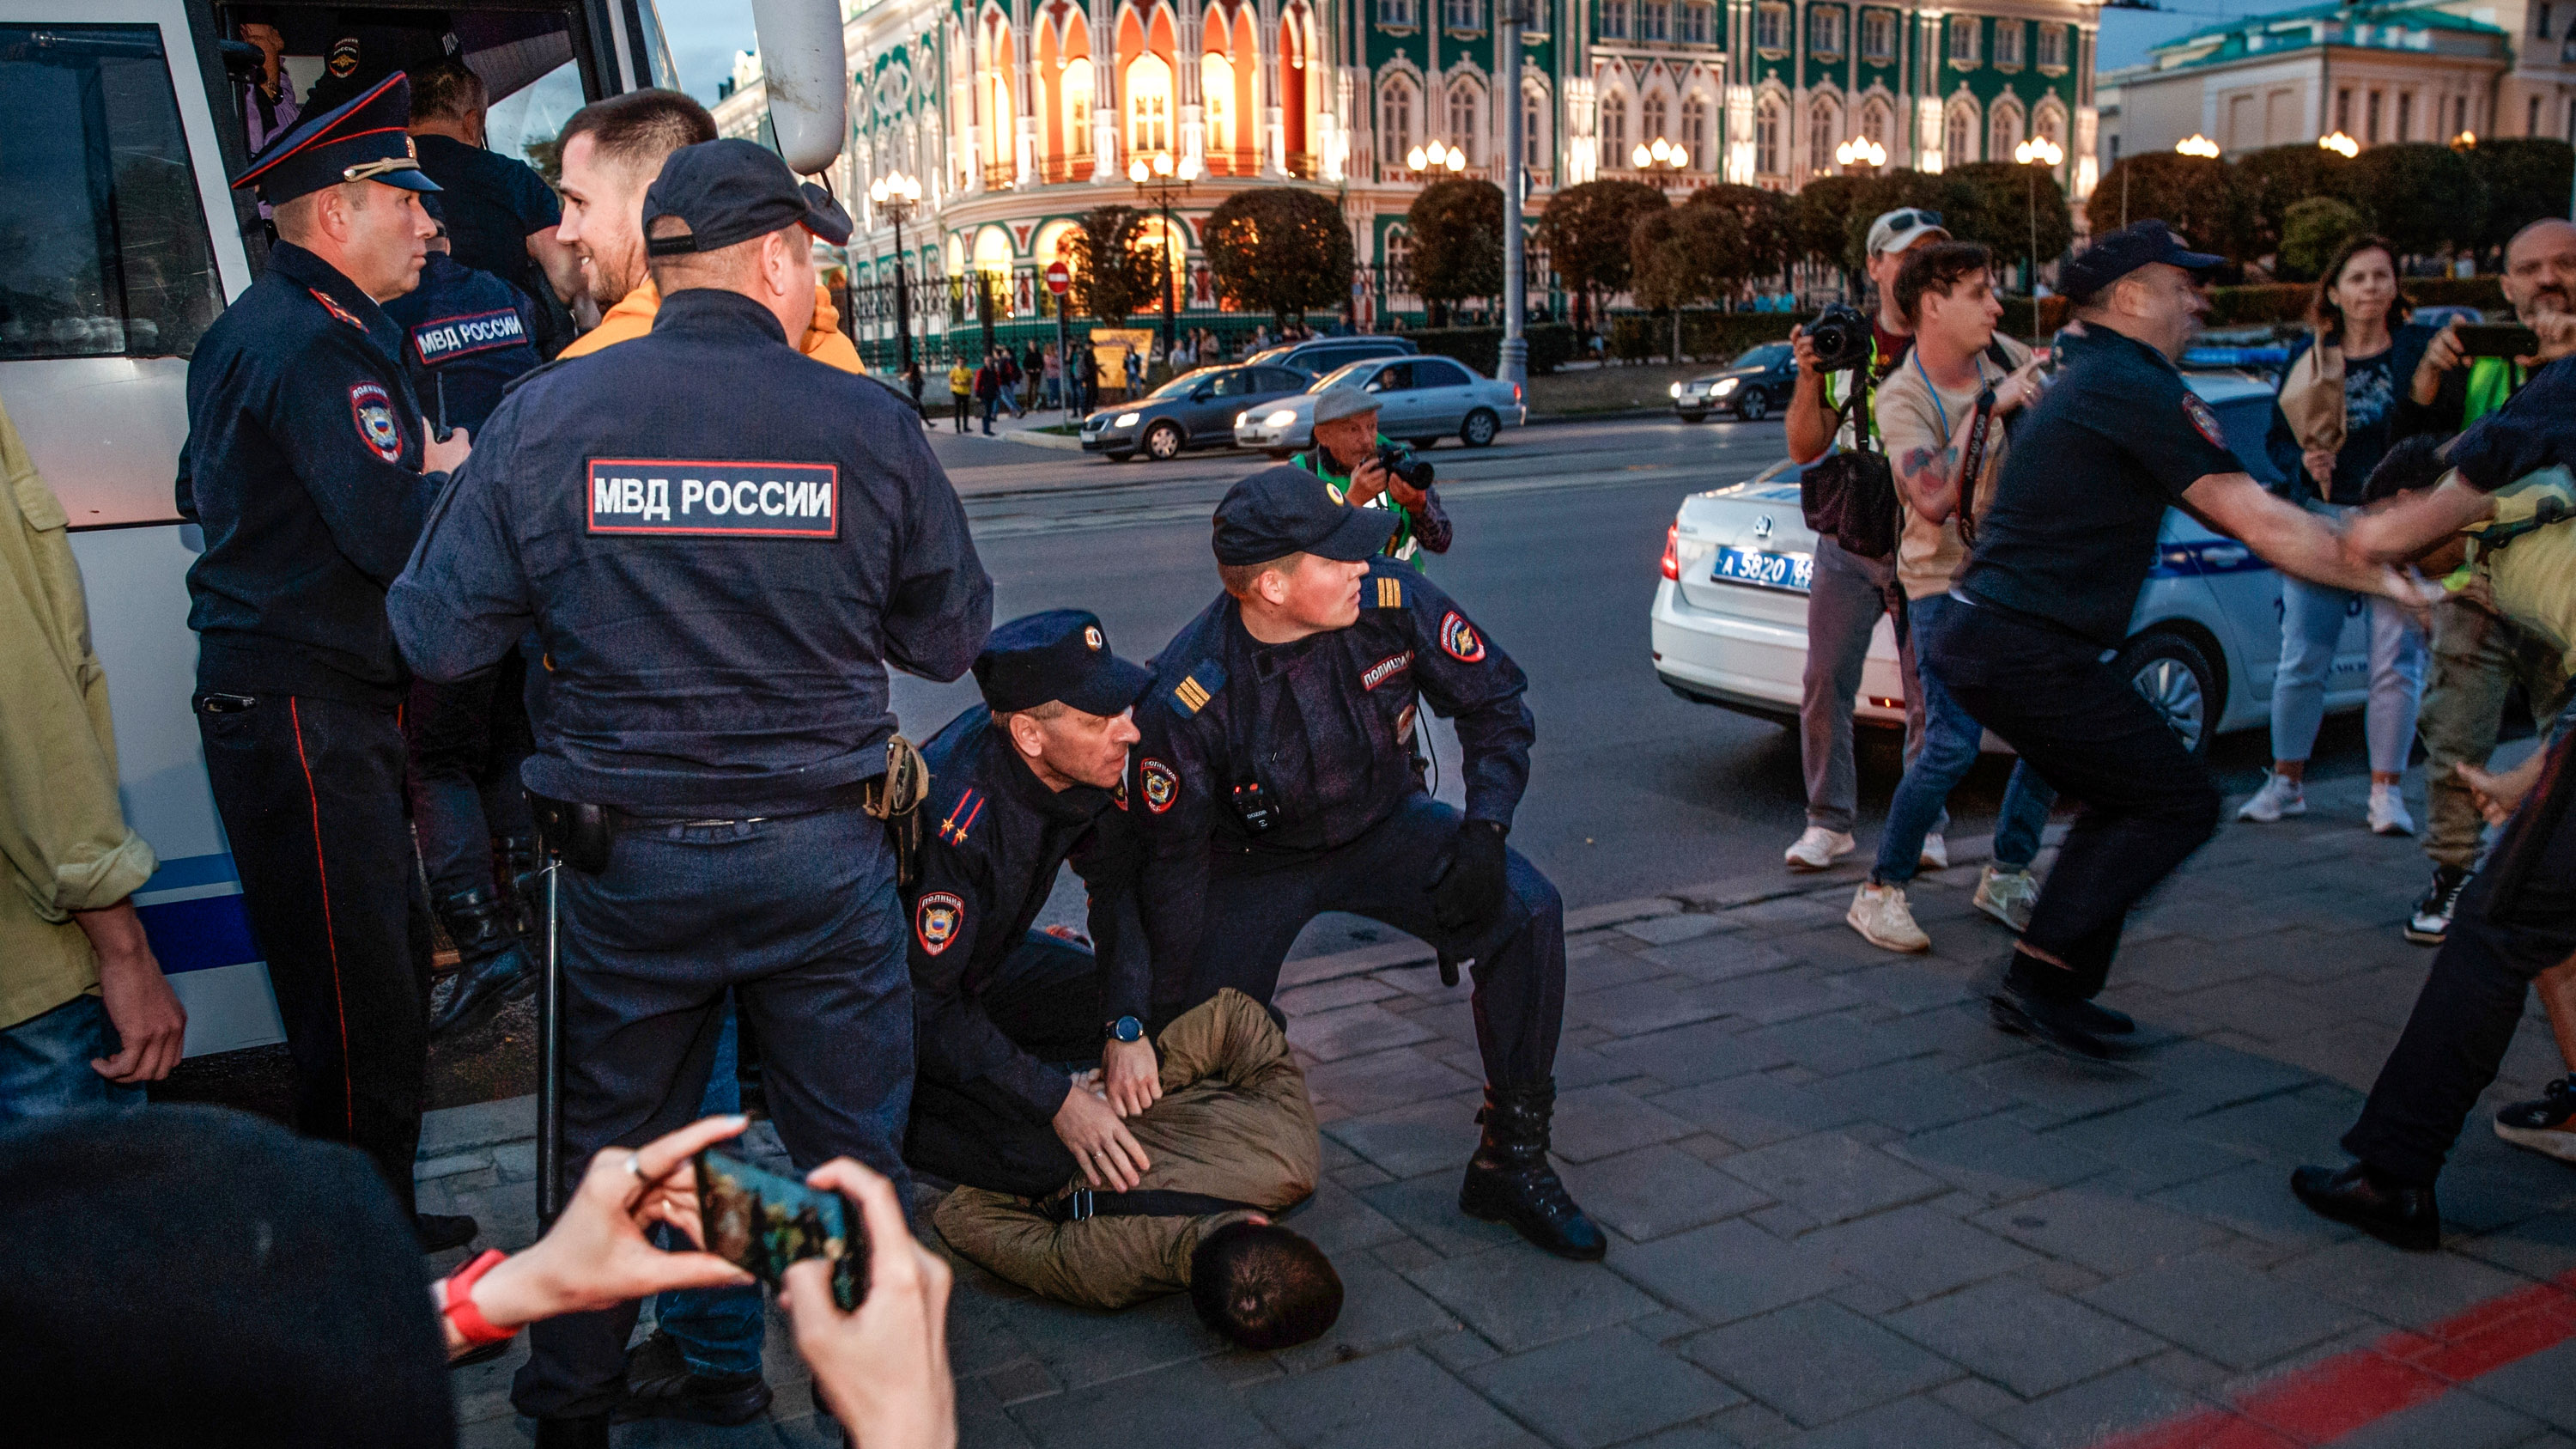 Police detain demonstrators during a protest against mobilization in Yekaterinburg, Russia while spectators record on cameras and phones.